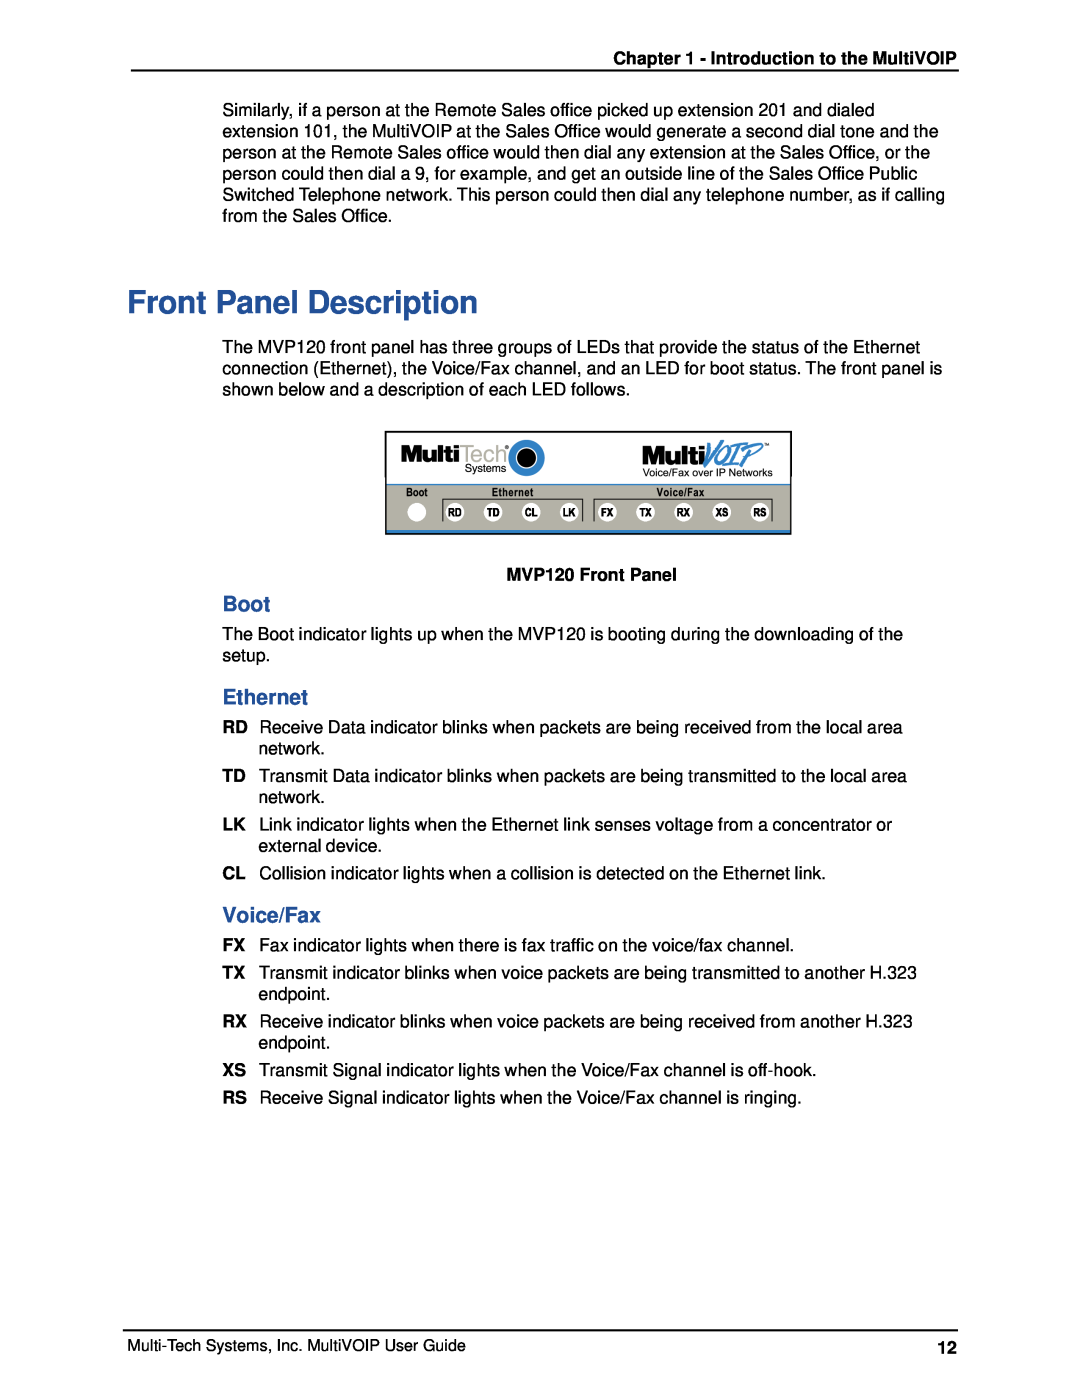 Multi-Tech Systems MVP120 manual Front Panel Description, Boot, Ethernet, Voice/Fax, Introduction to the MultiVOIP 